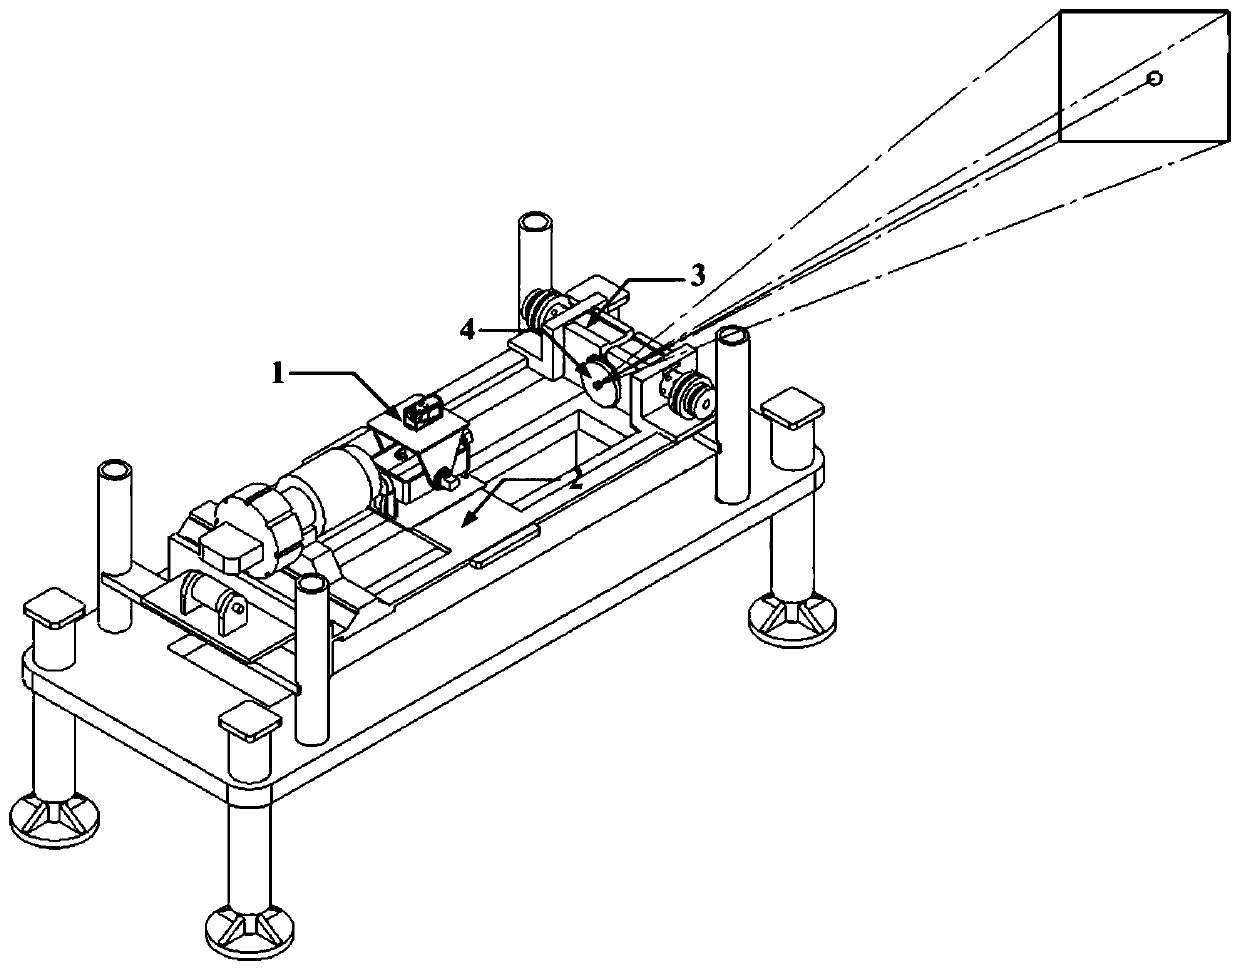 Trepanning orientation measurement device and method fixed on drilling machine